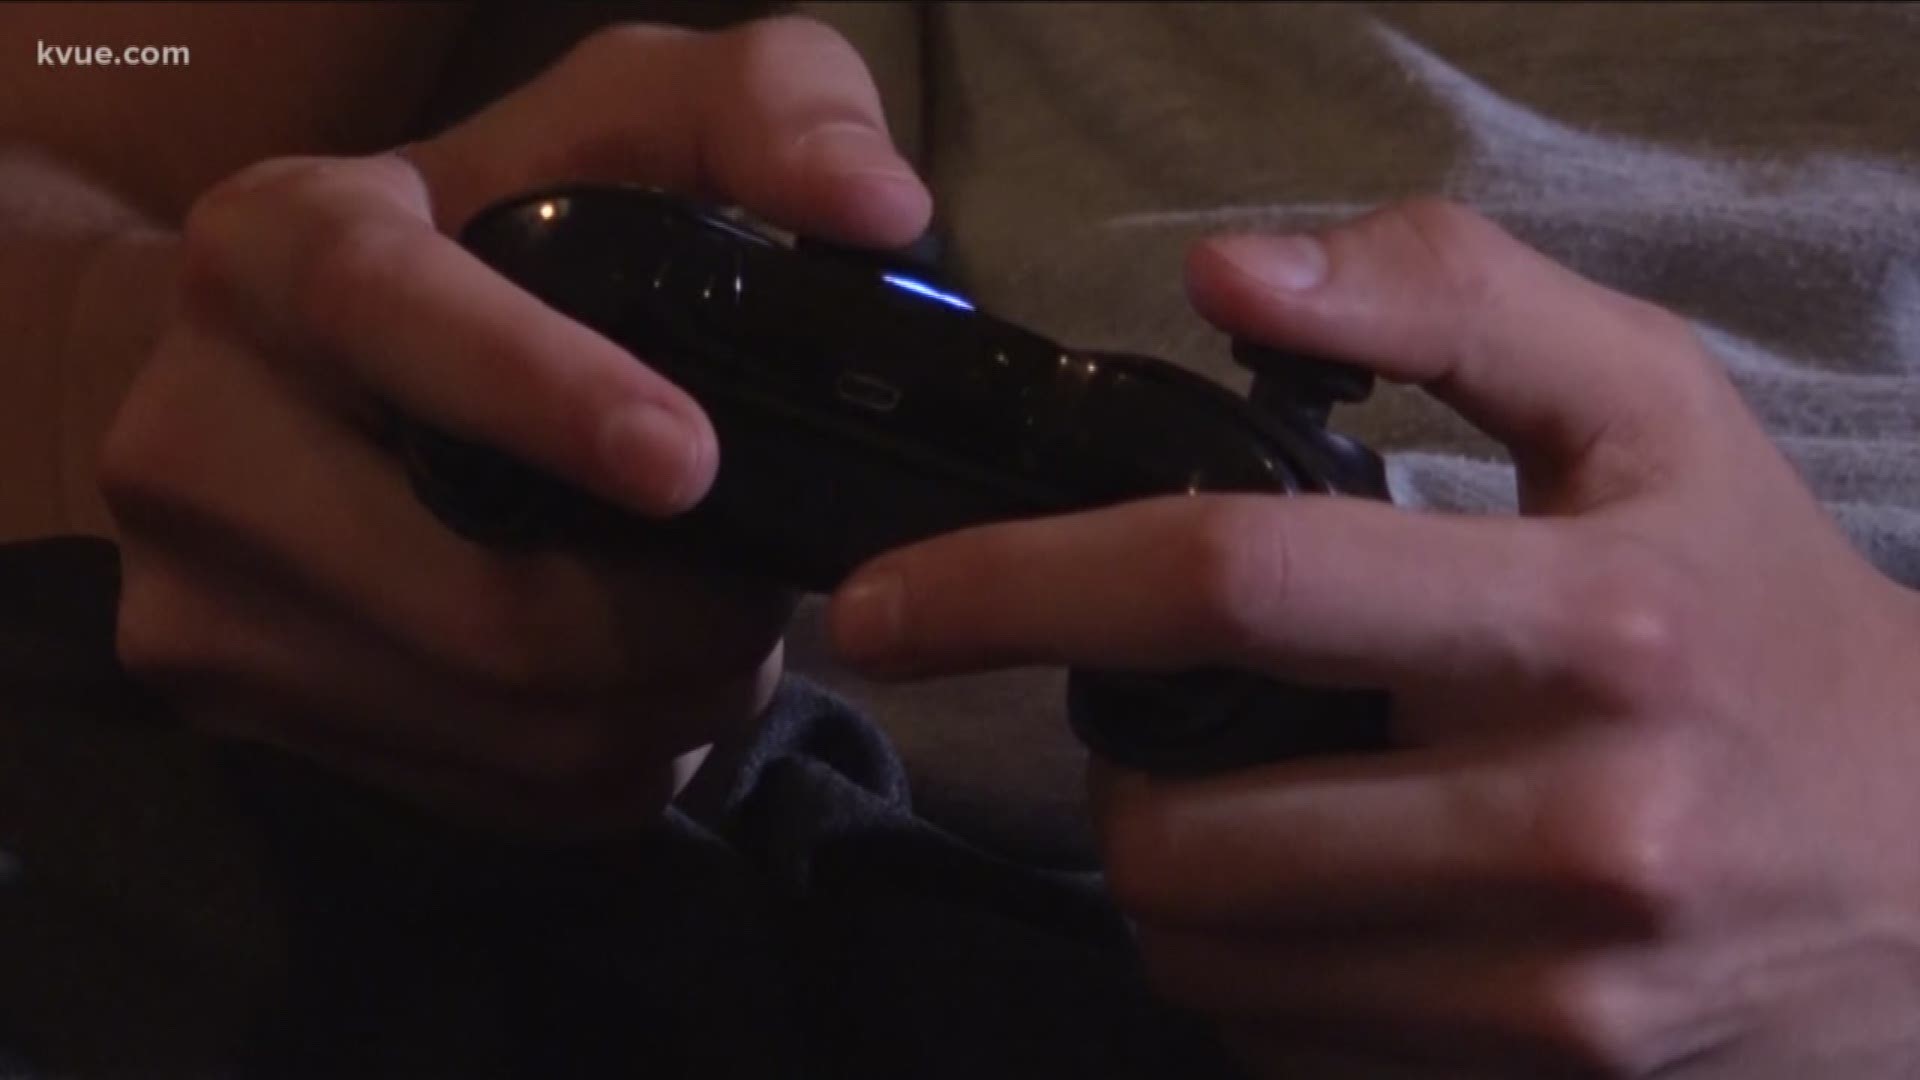 KVUE's Jay Wallis shows us how video gaming is not only changing the screen, it's changing our homes as well.